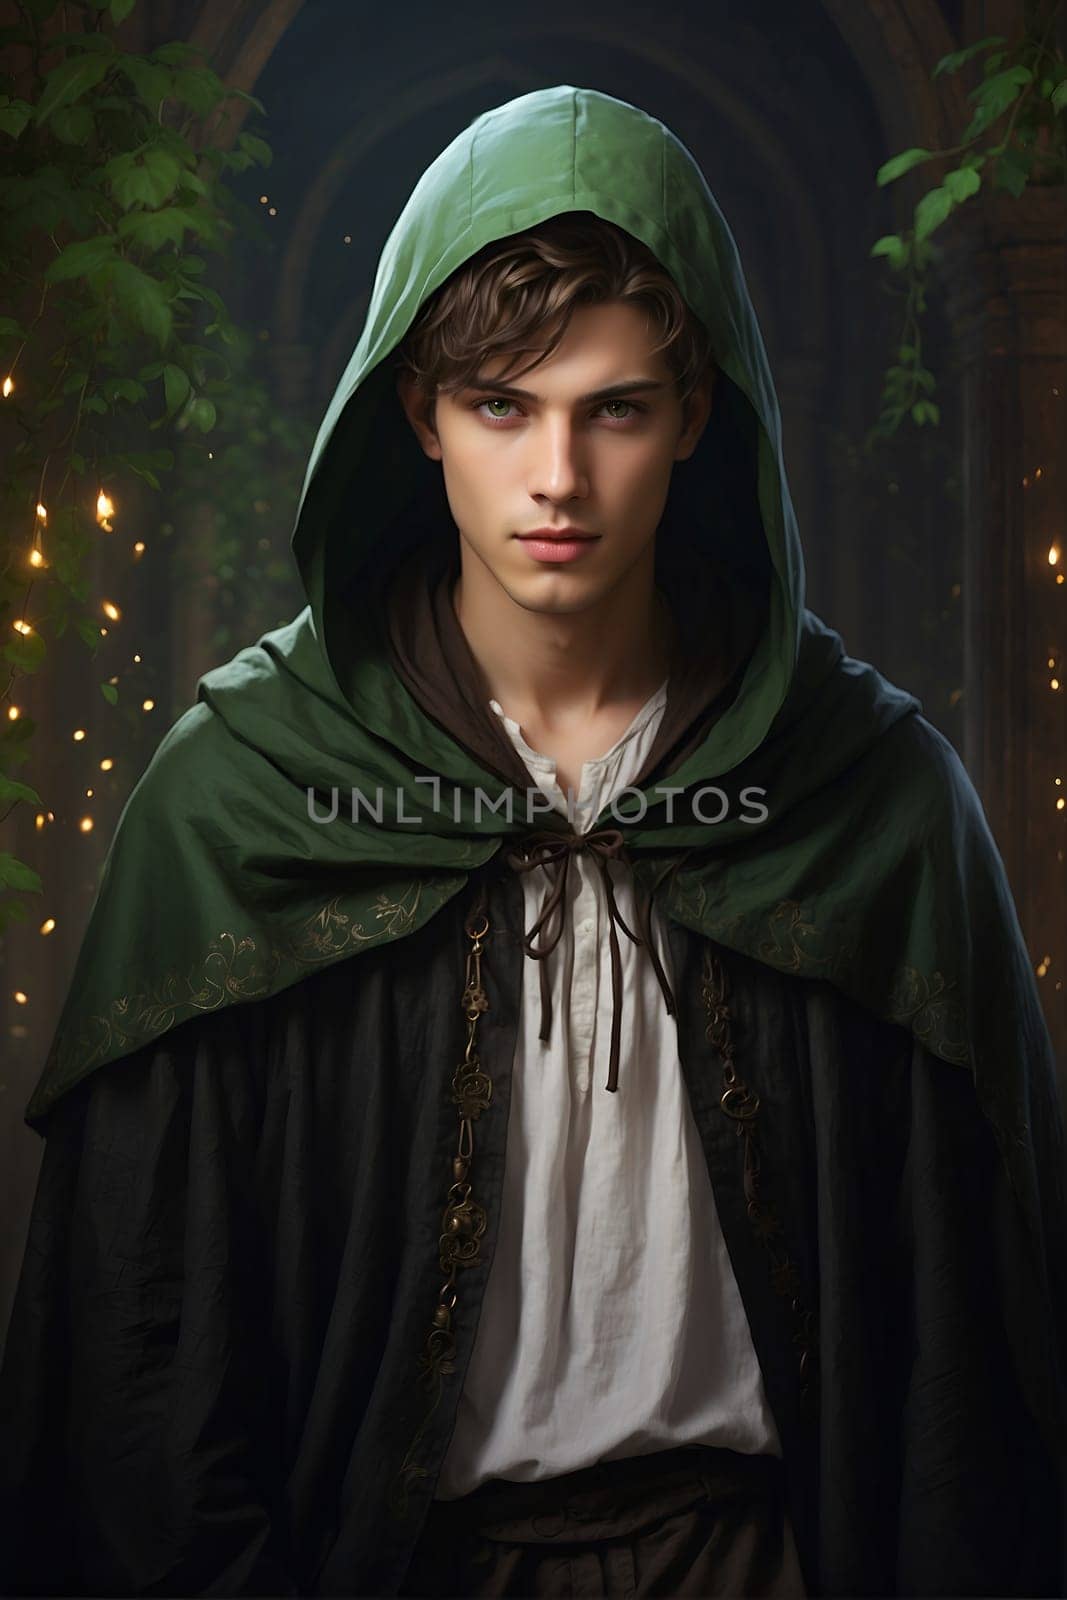 A young man wearing a green hooded cloak stands solemnly against a natural backdrop.